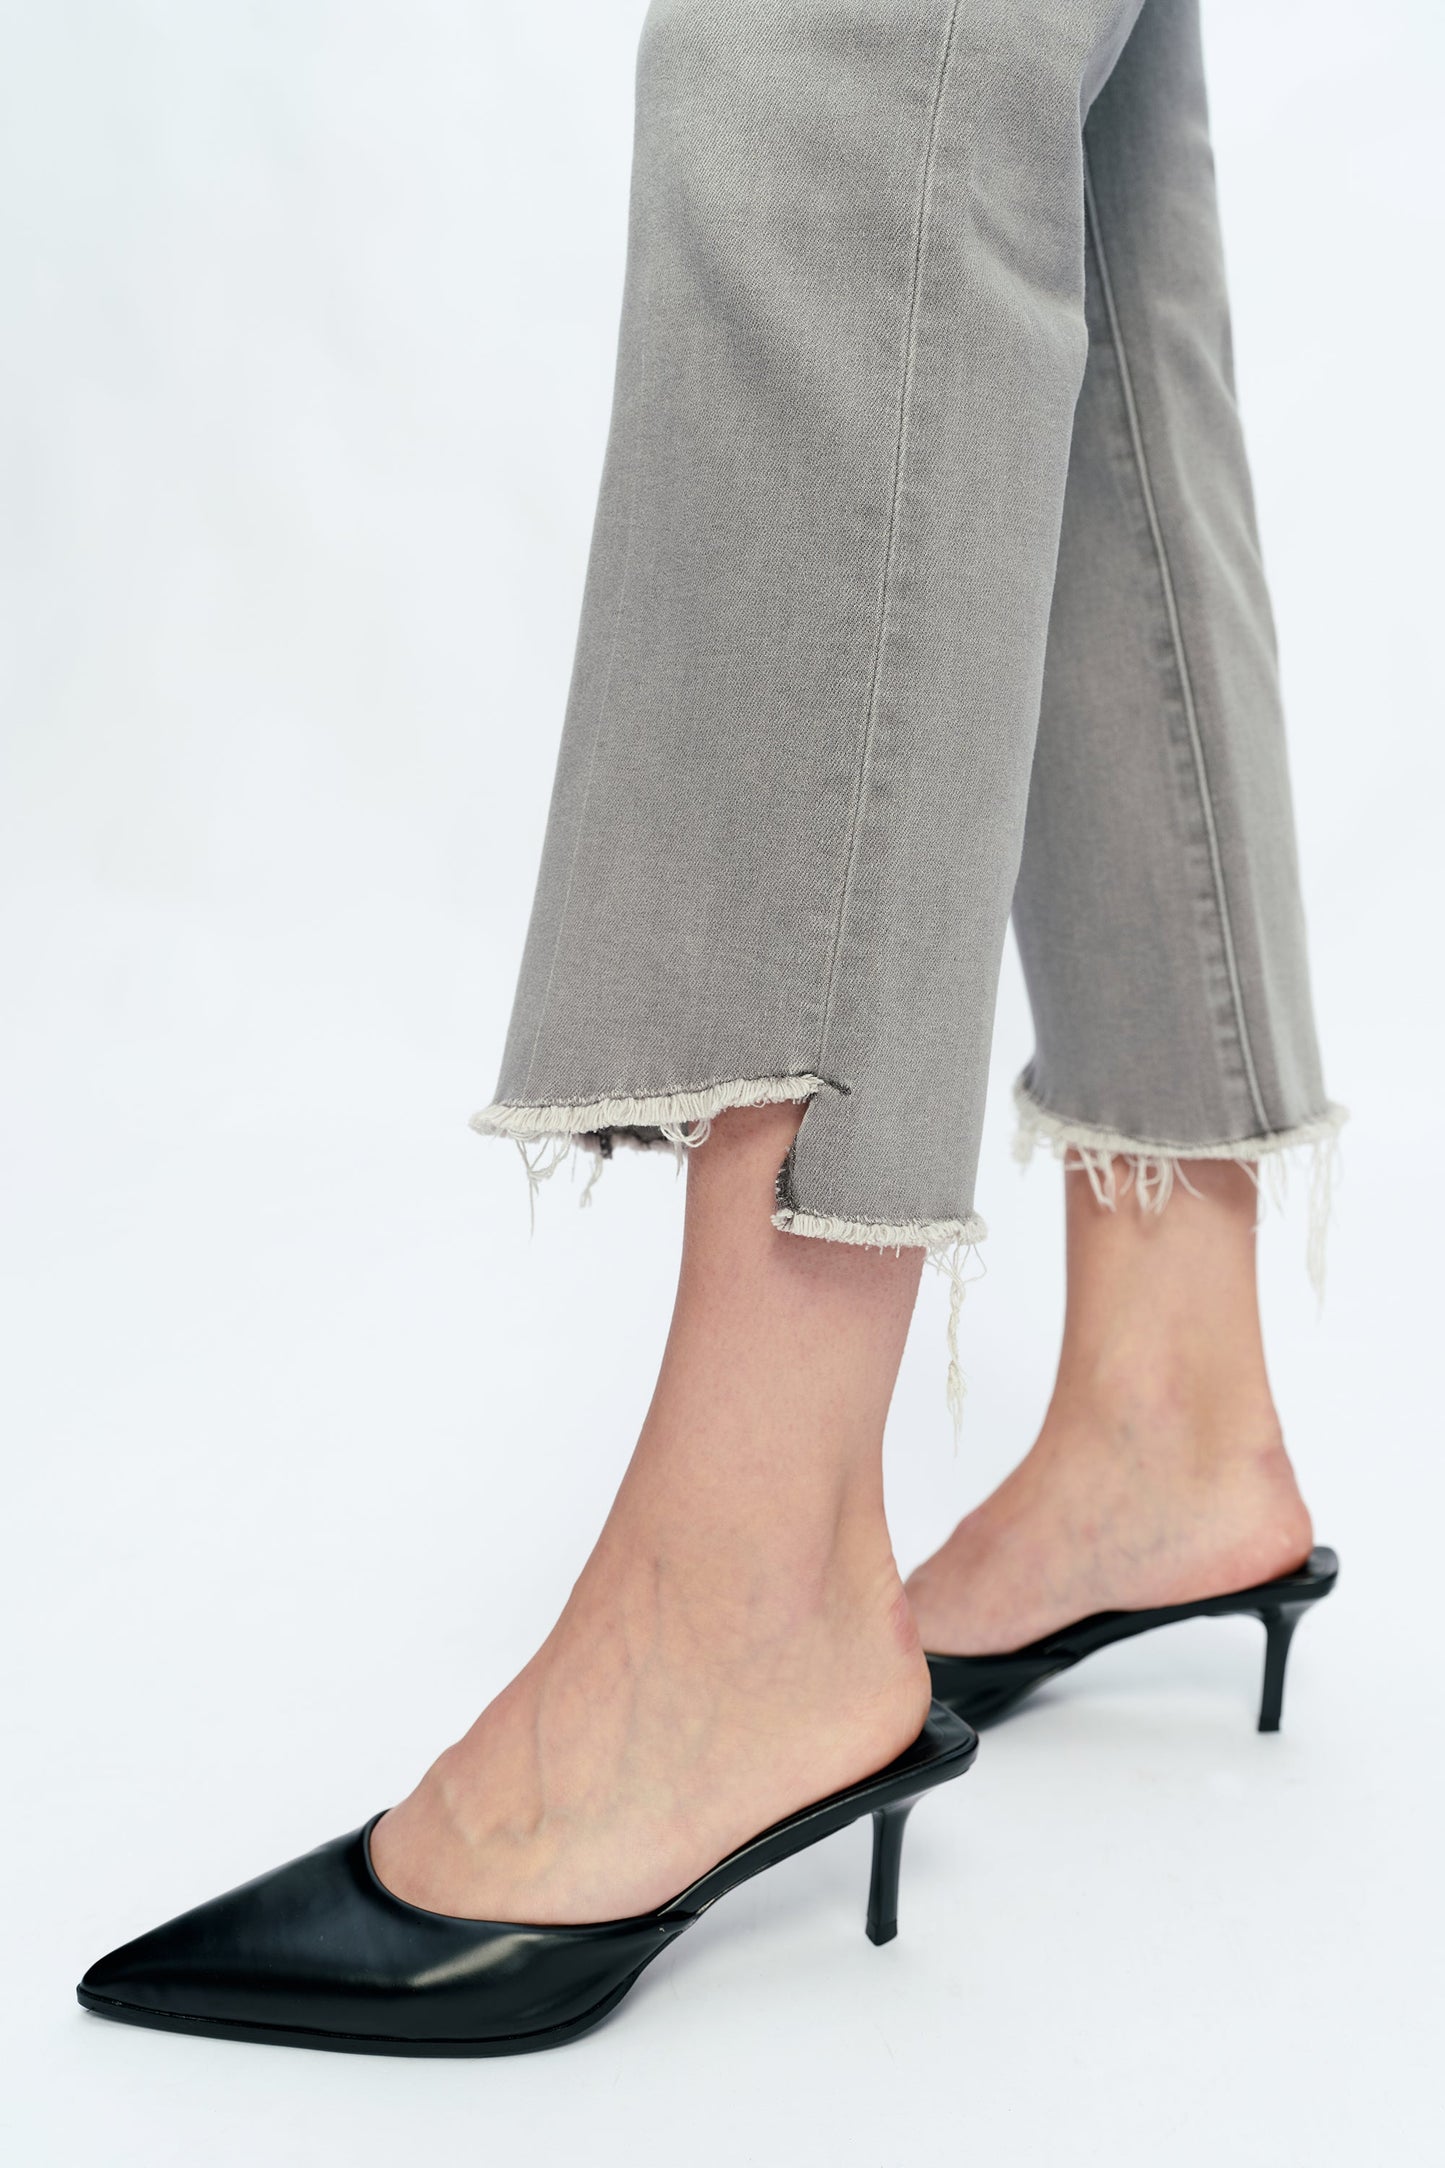 HIGH RISE STRAIGHT ANKLE JEANS WITH RAW EDGE BYT5154 GRAY